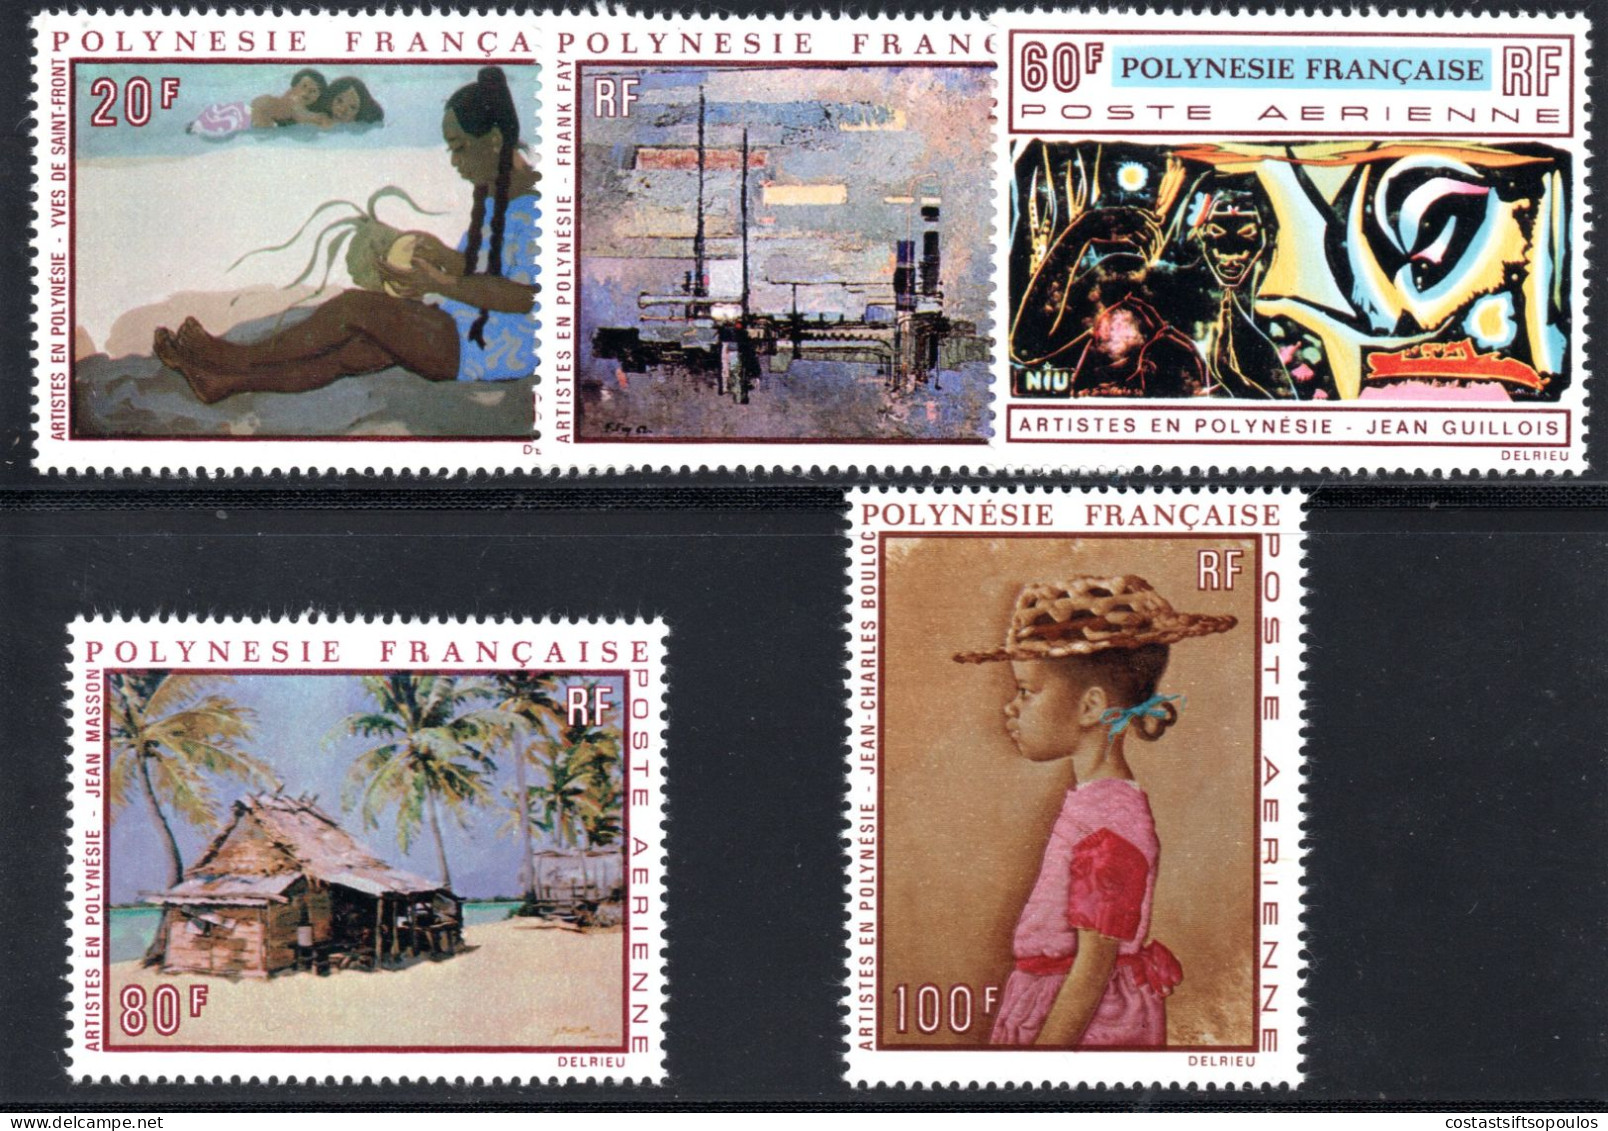 2047. POLYNESIA. 1970 PAINTINGS Y.T.A40-A44 MNH. VERY FINE AND FRESH. - Ungebraucht